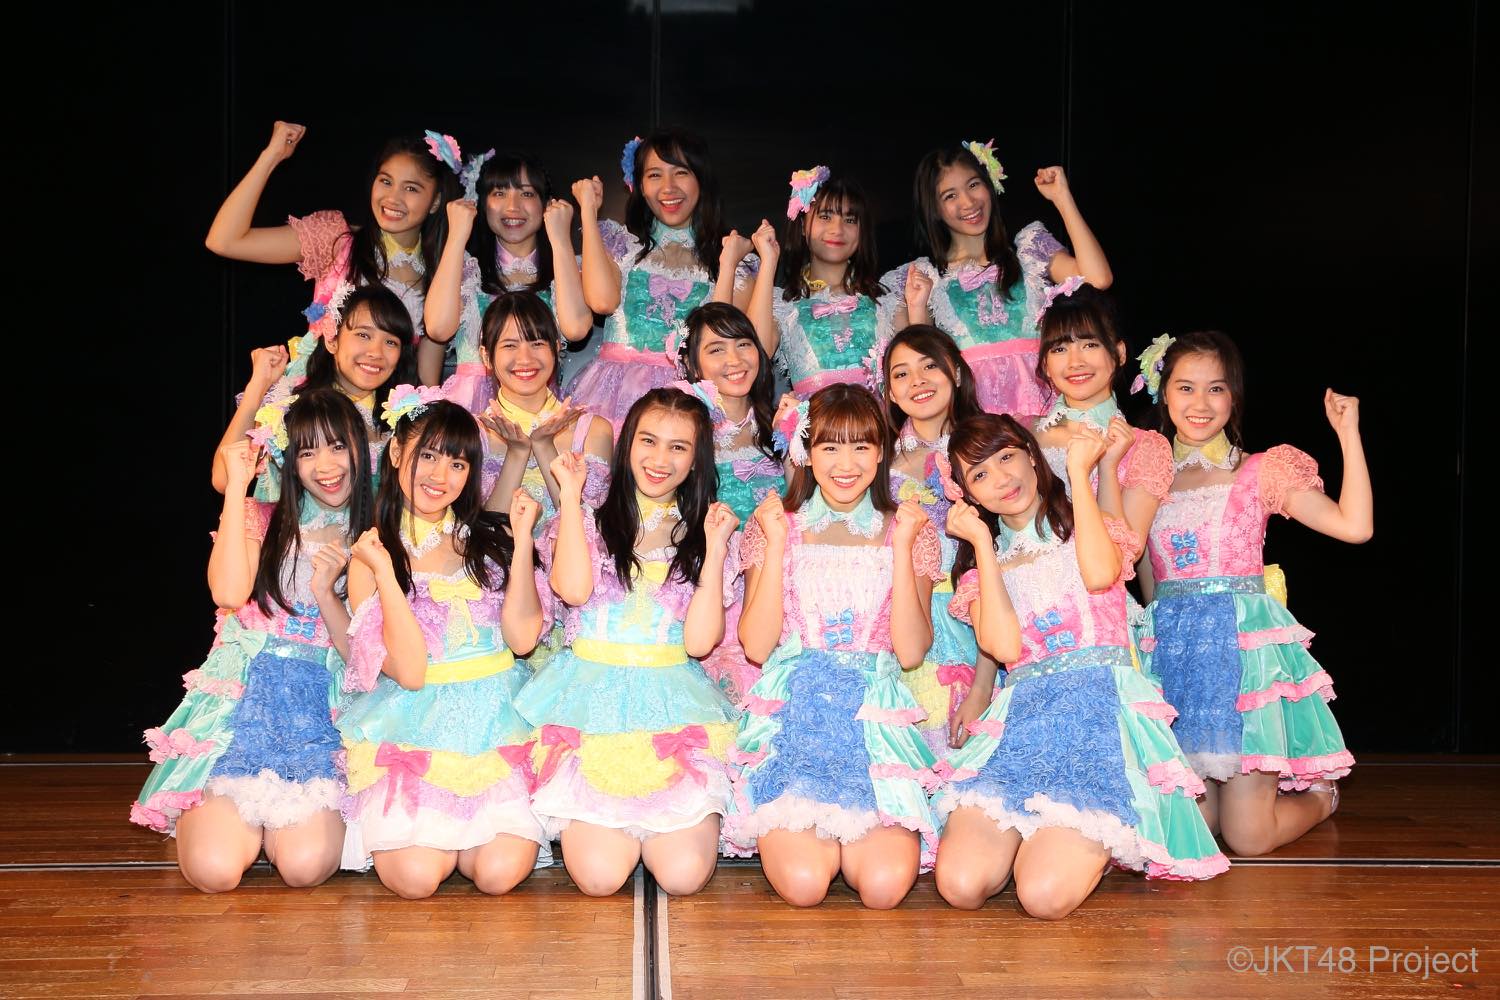 Homecoming for Haruka Nakagawa! JKT48 Performs in AKB48 Theater for First Time!